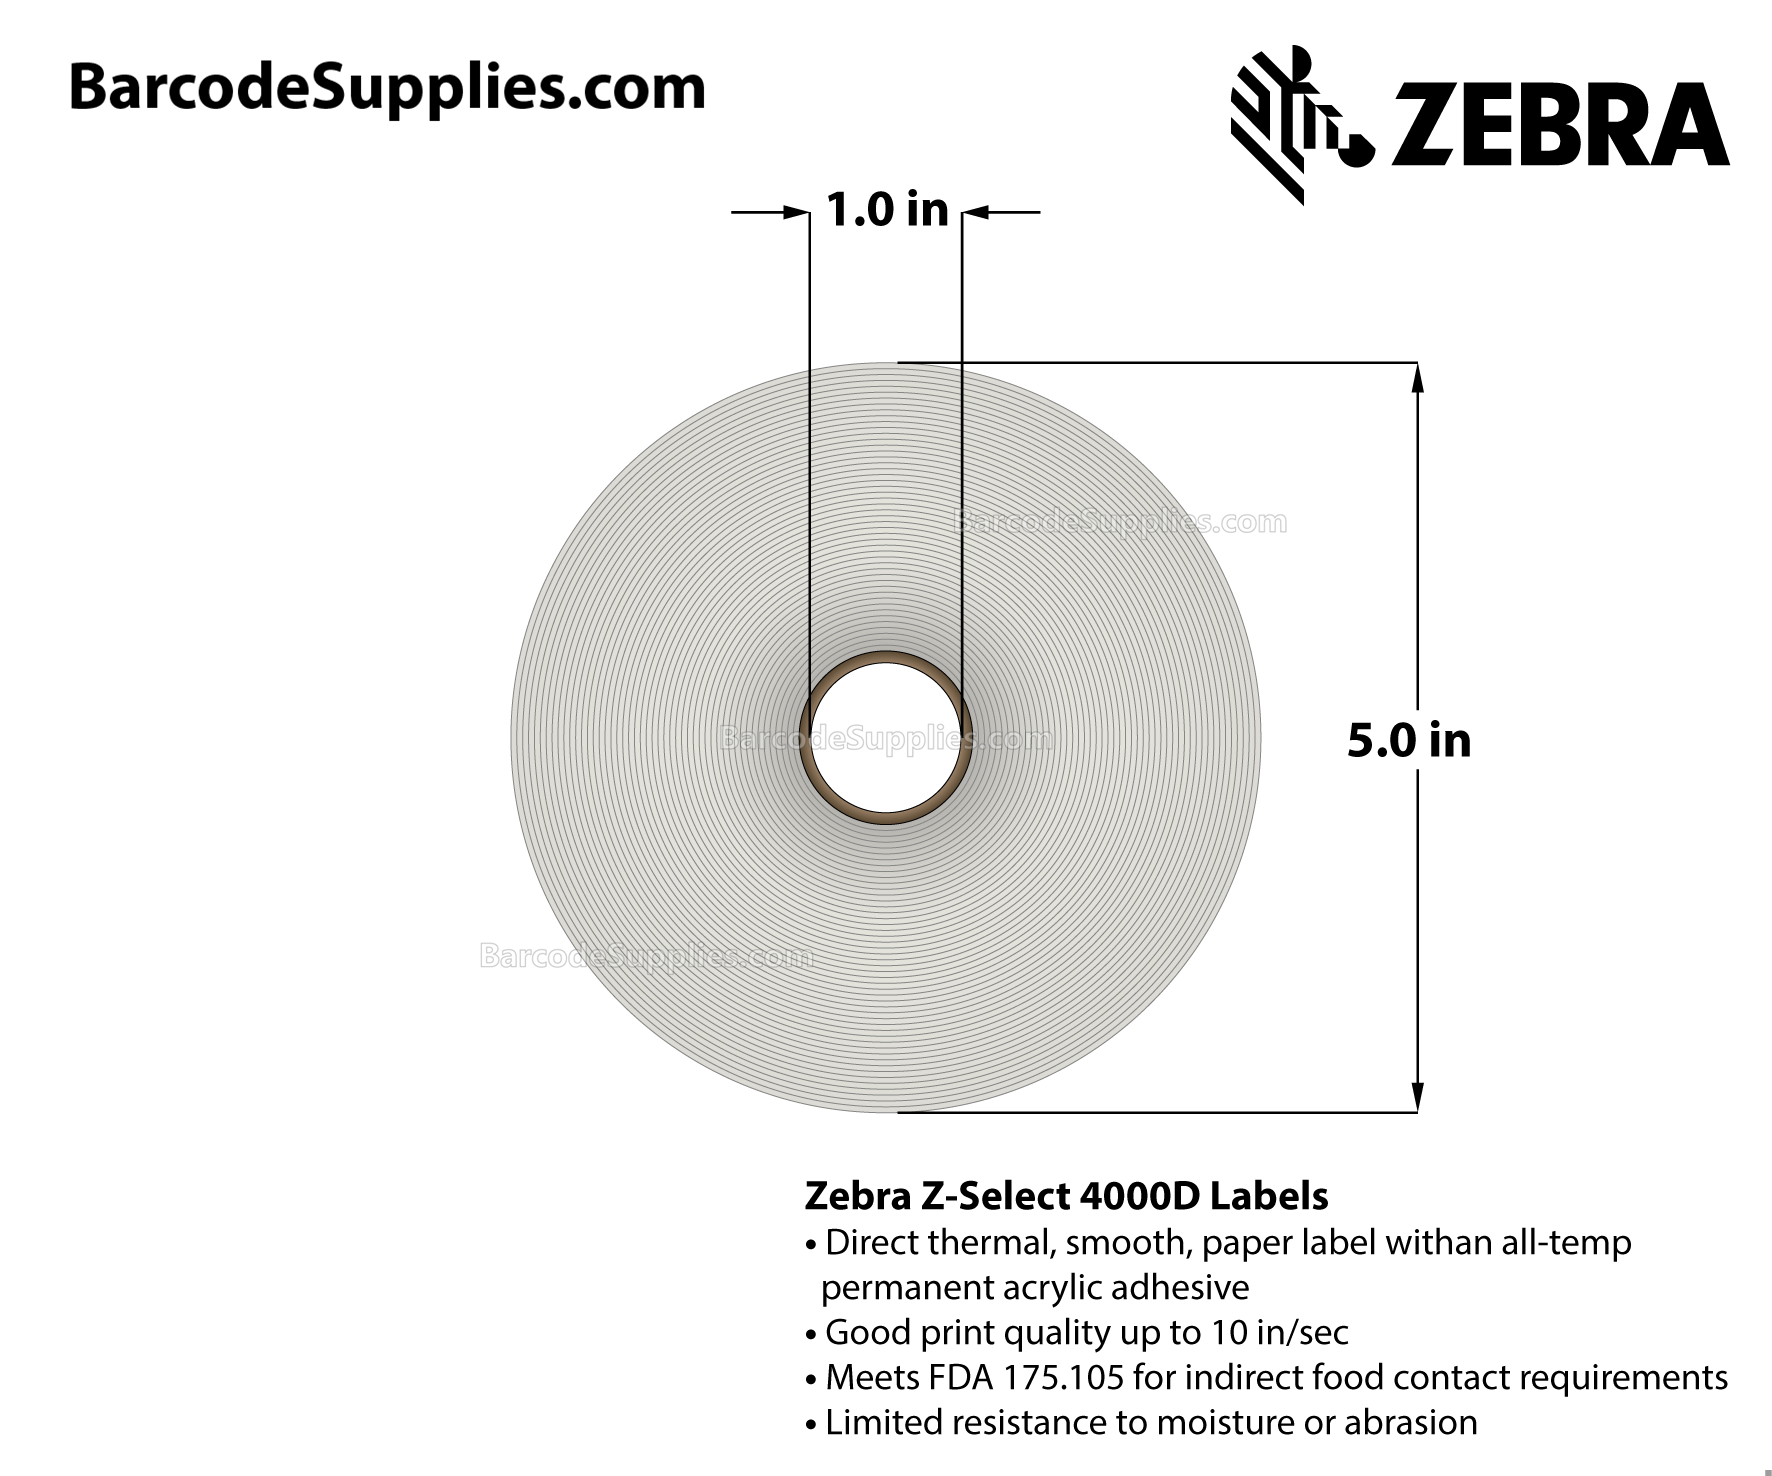 2.25 x 0.5 Direct Thermal White Z-Select 4000D Labels With All-Temp Adhesive - Perforated - 4200 Labels Per Roll - Carton Of 4 Rolls - 16800 Labels Total - MPN: 10010040